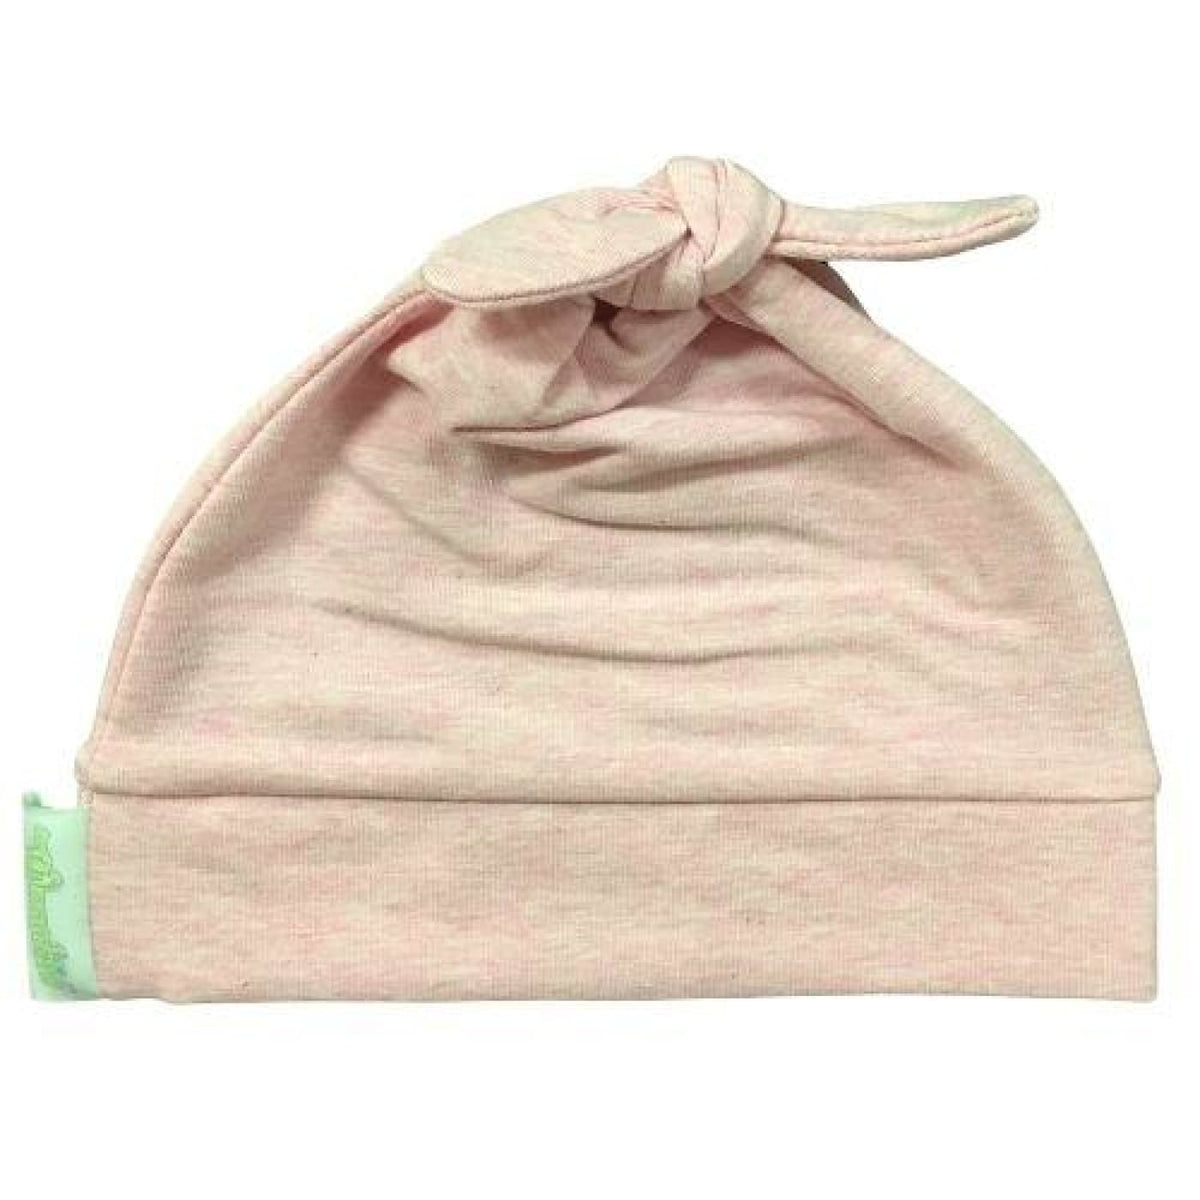 Woombie Cotton Beanie - Pink Posey 0-6M - 0-6m / Pink Posey - BABY &amp; TODDLER CLOTHING - BEANIES/HATS